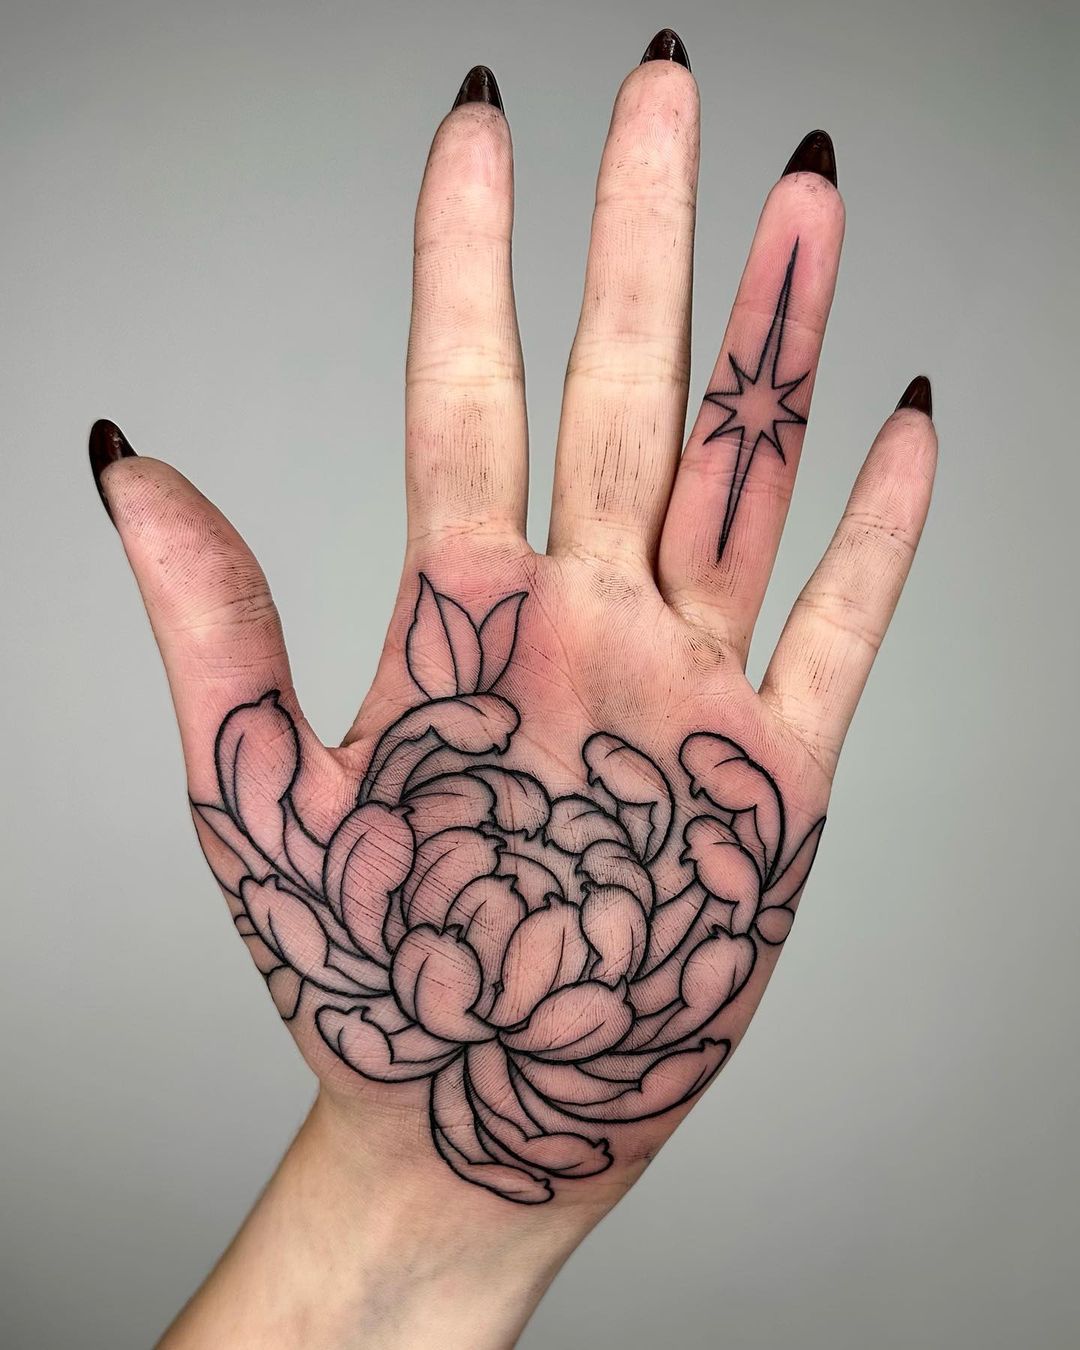 squigglysqualor did up a chrysanthemum elbow piece to add to the floral  theme 🌼You can spot some of her healed work, a few irises, ju... |  Instagram